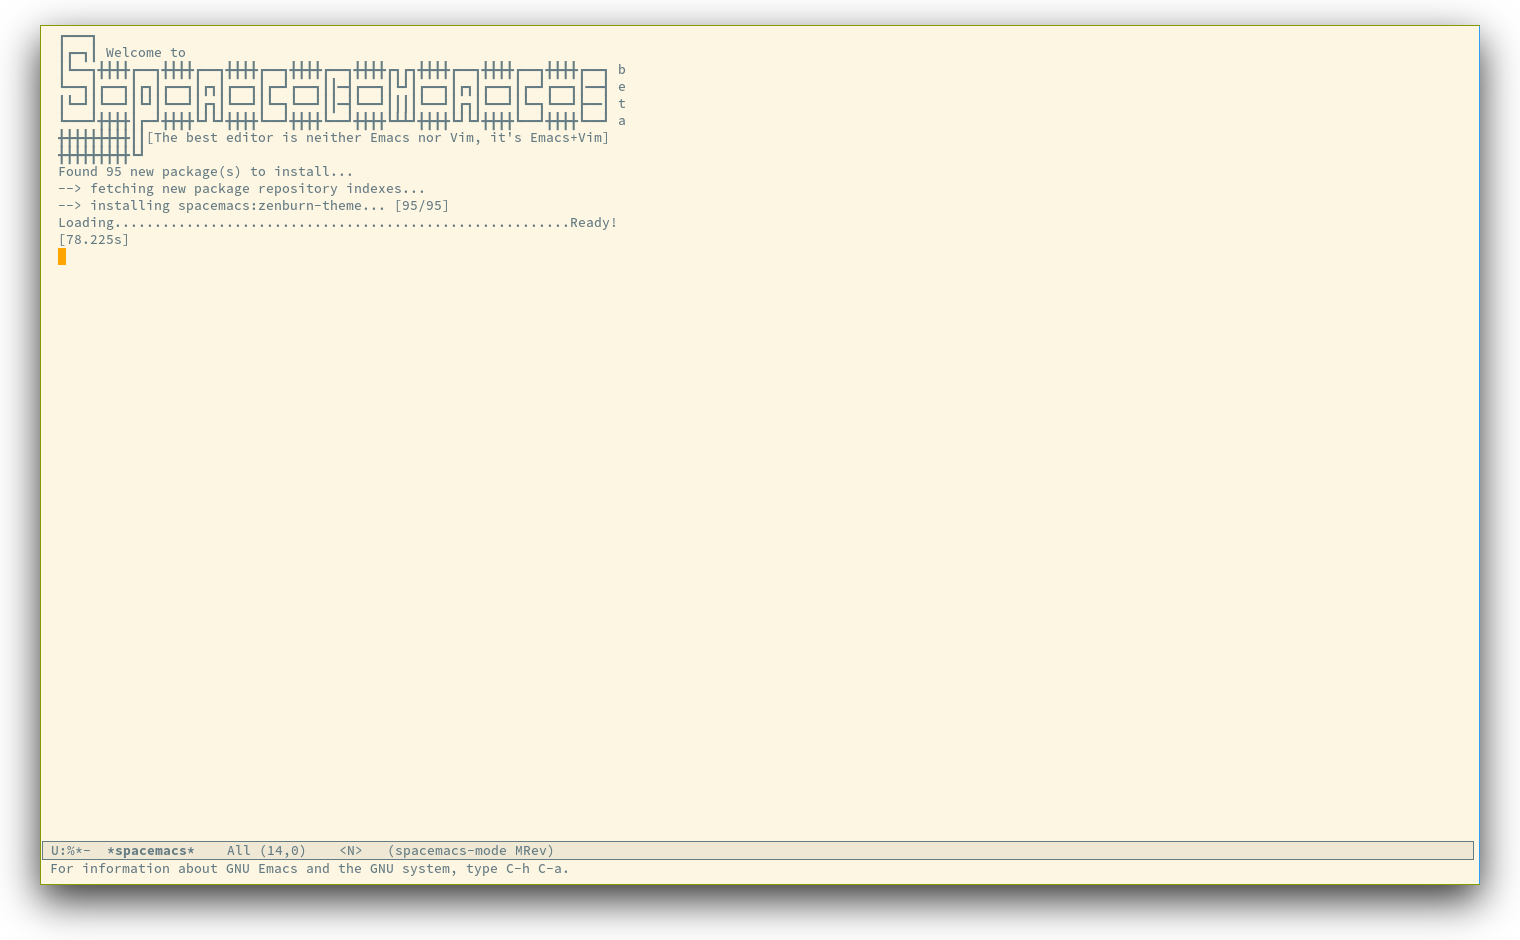 /TakeV/spacemacs/media/commit/d5bb7725d8eea70b4286a7fc932ecba93d242885/doc/img/spacemacs-startup.png